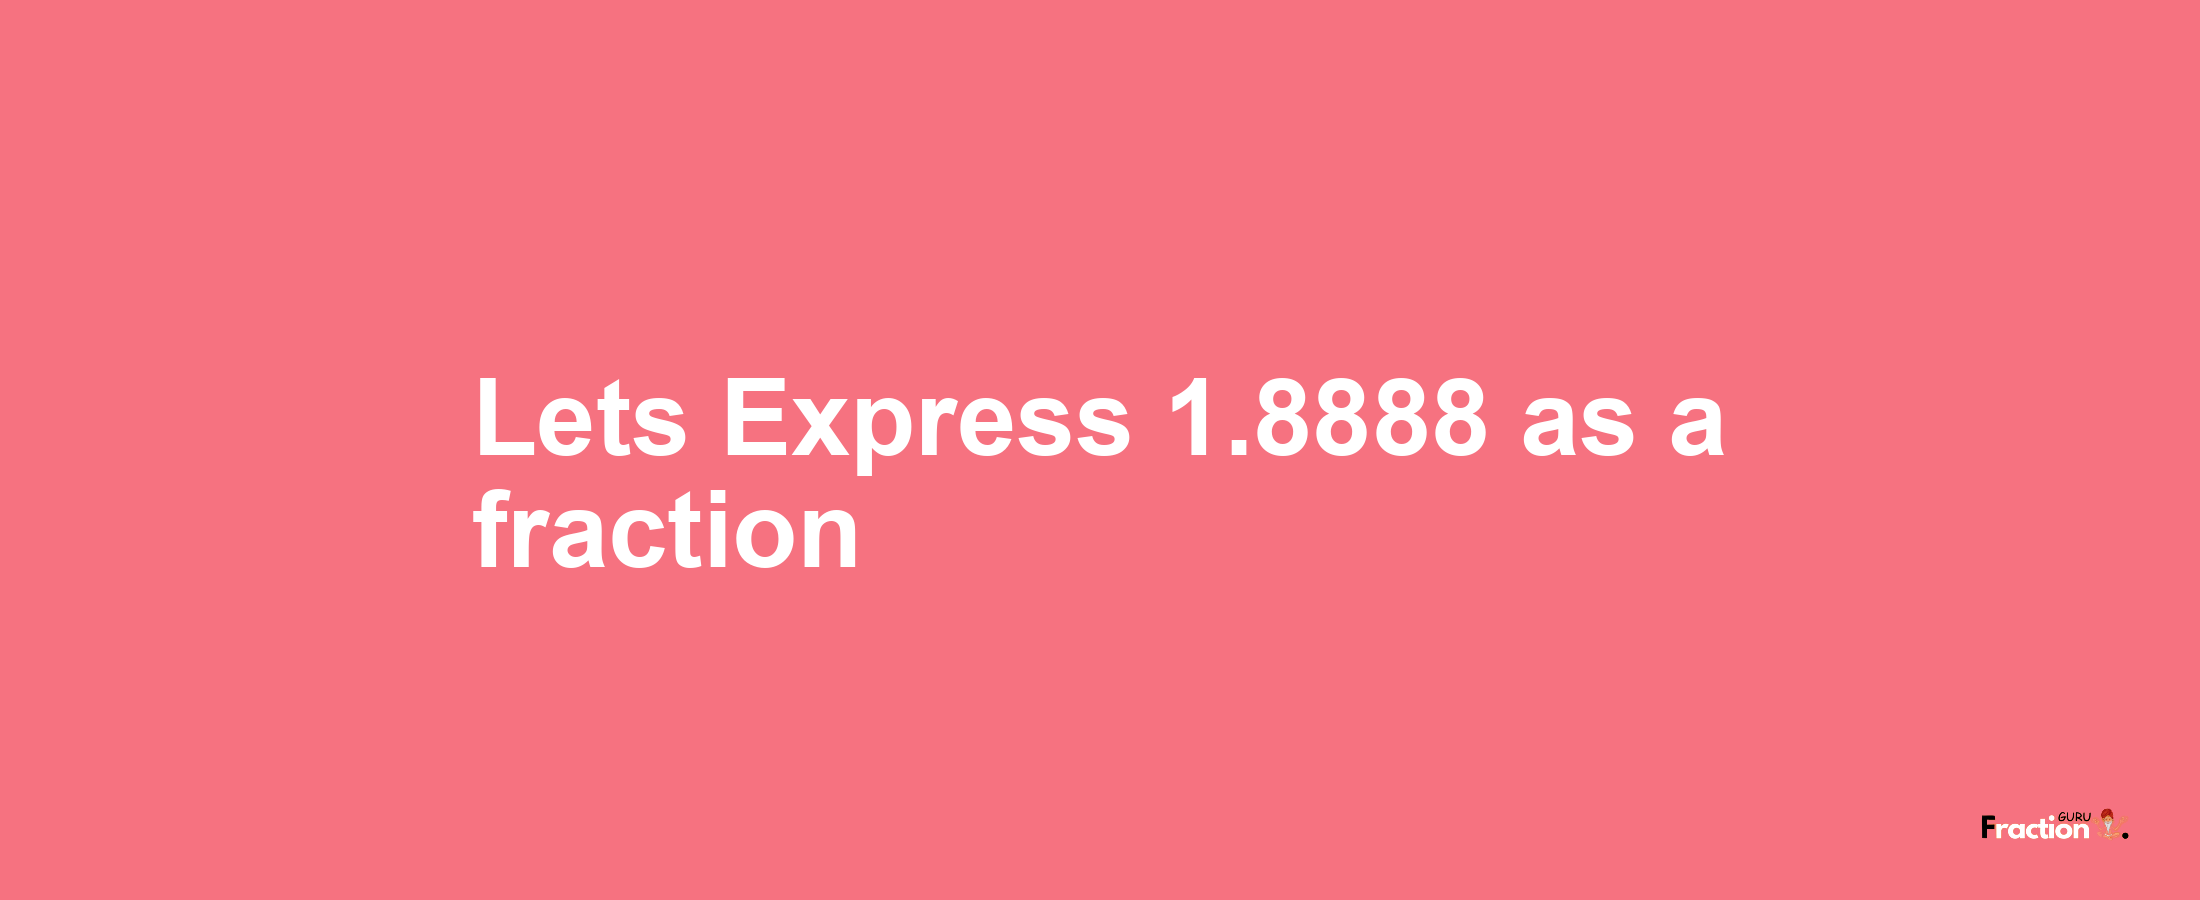 Lets Express 1.8888 as afraction